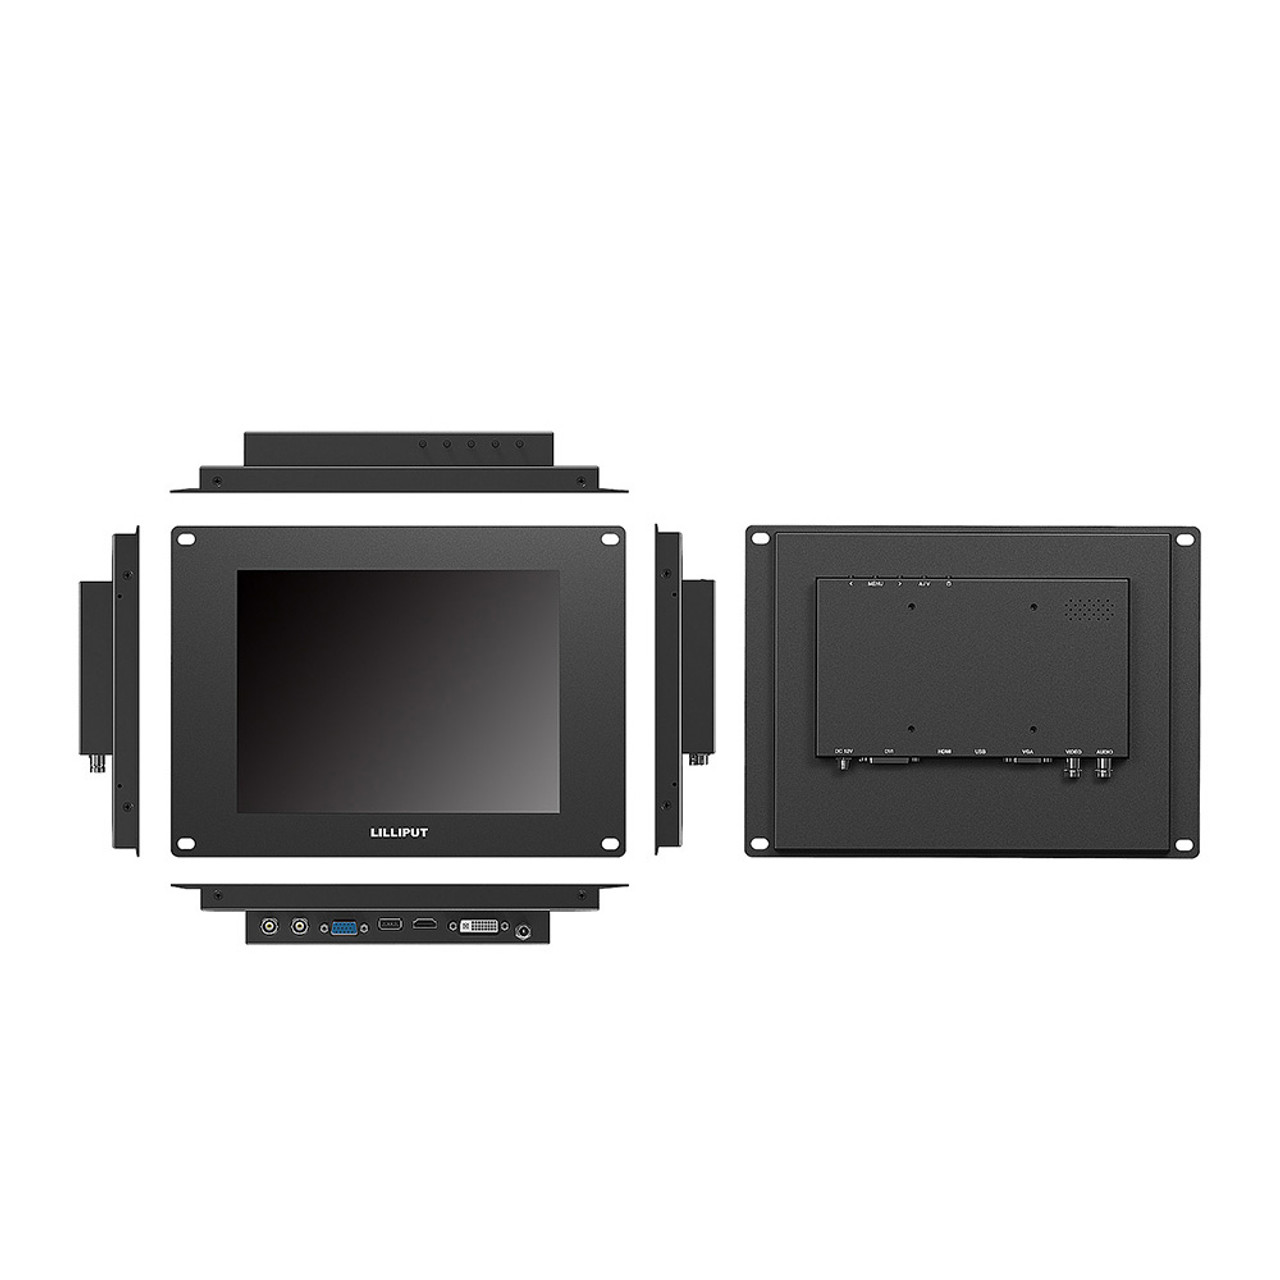 TK970-NP/C/T 9.7 inch industrial open frame touch monitor